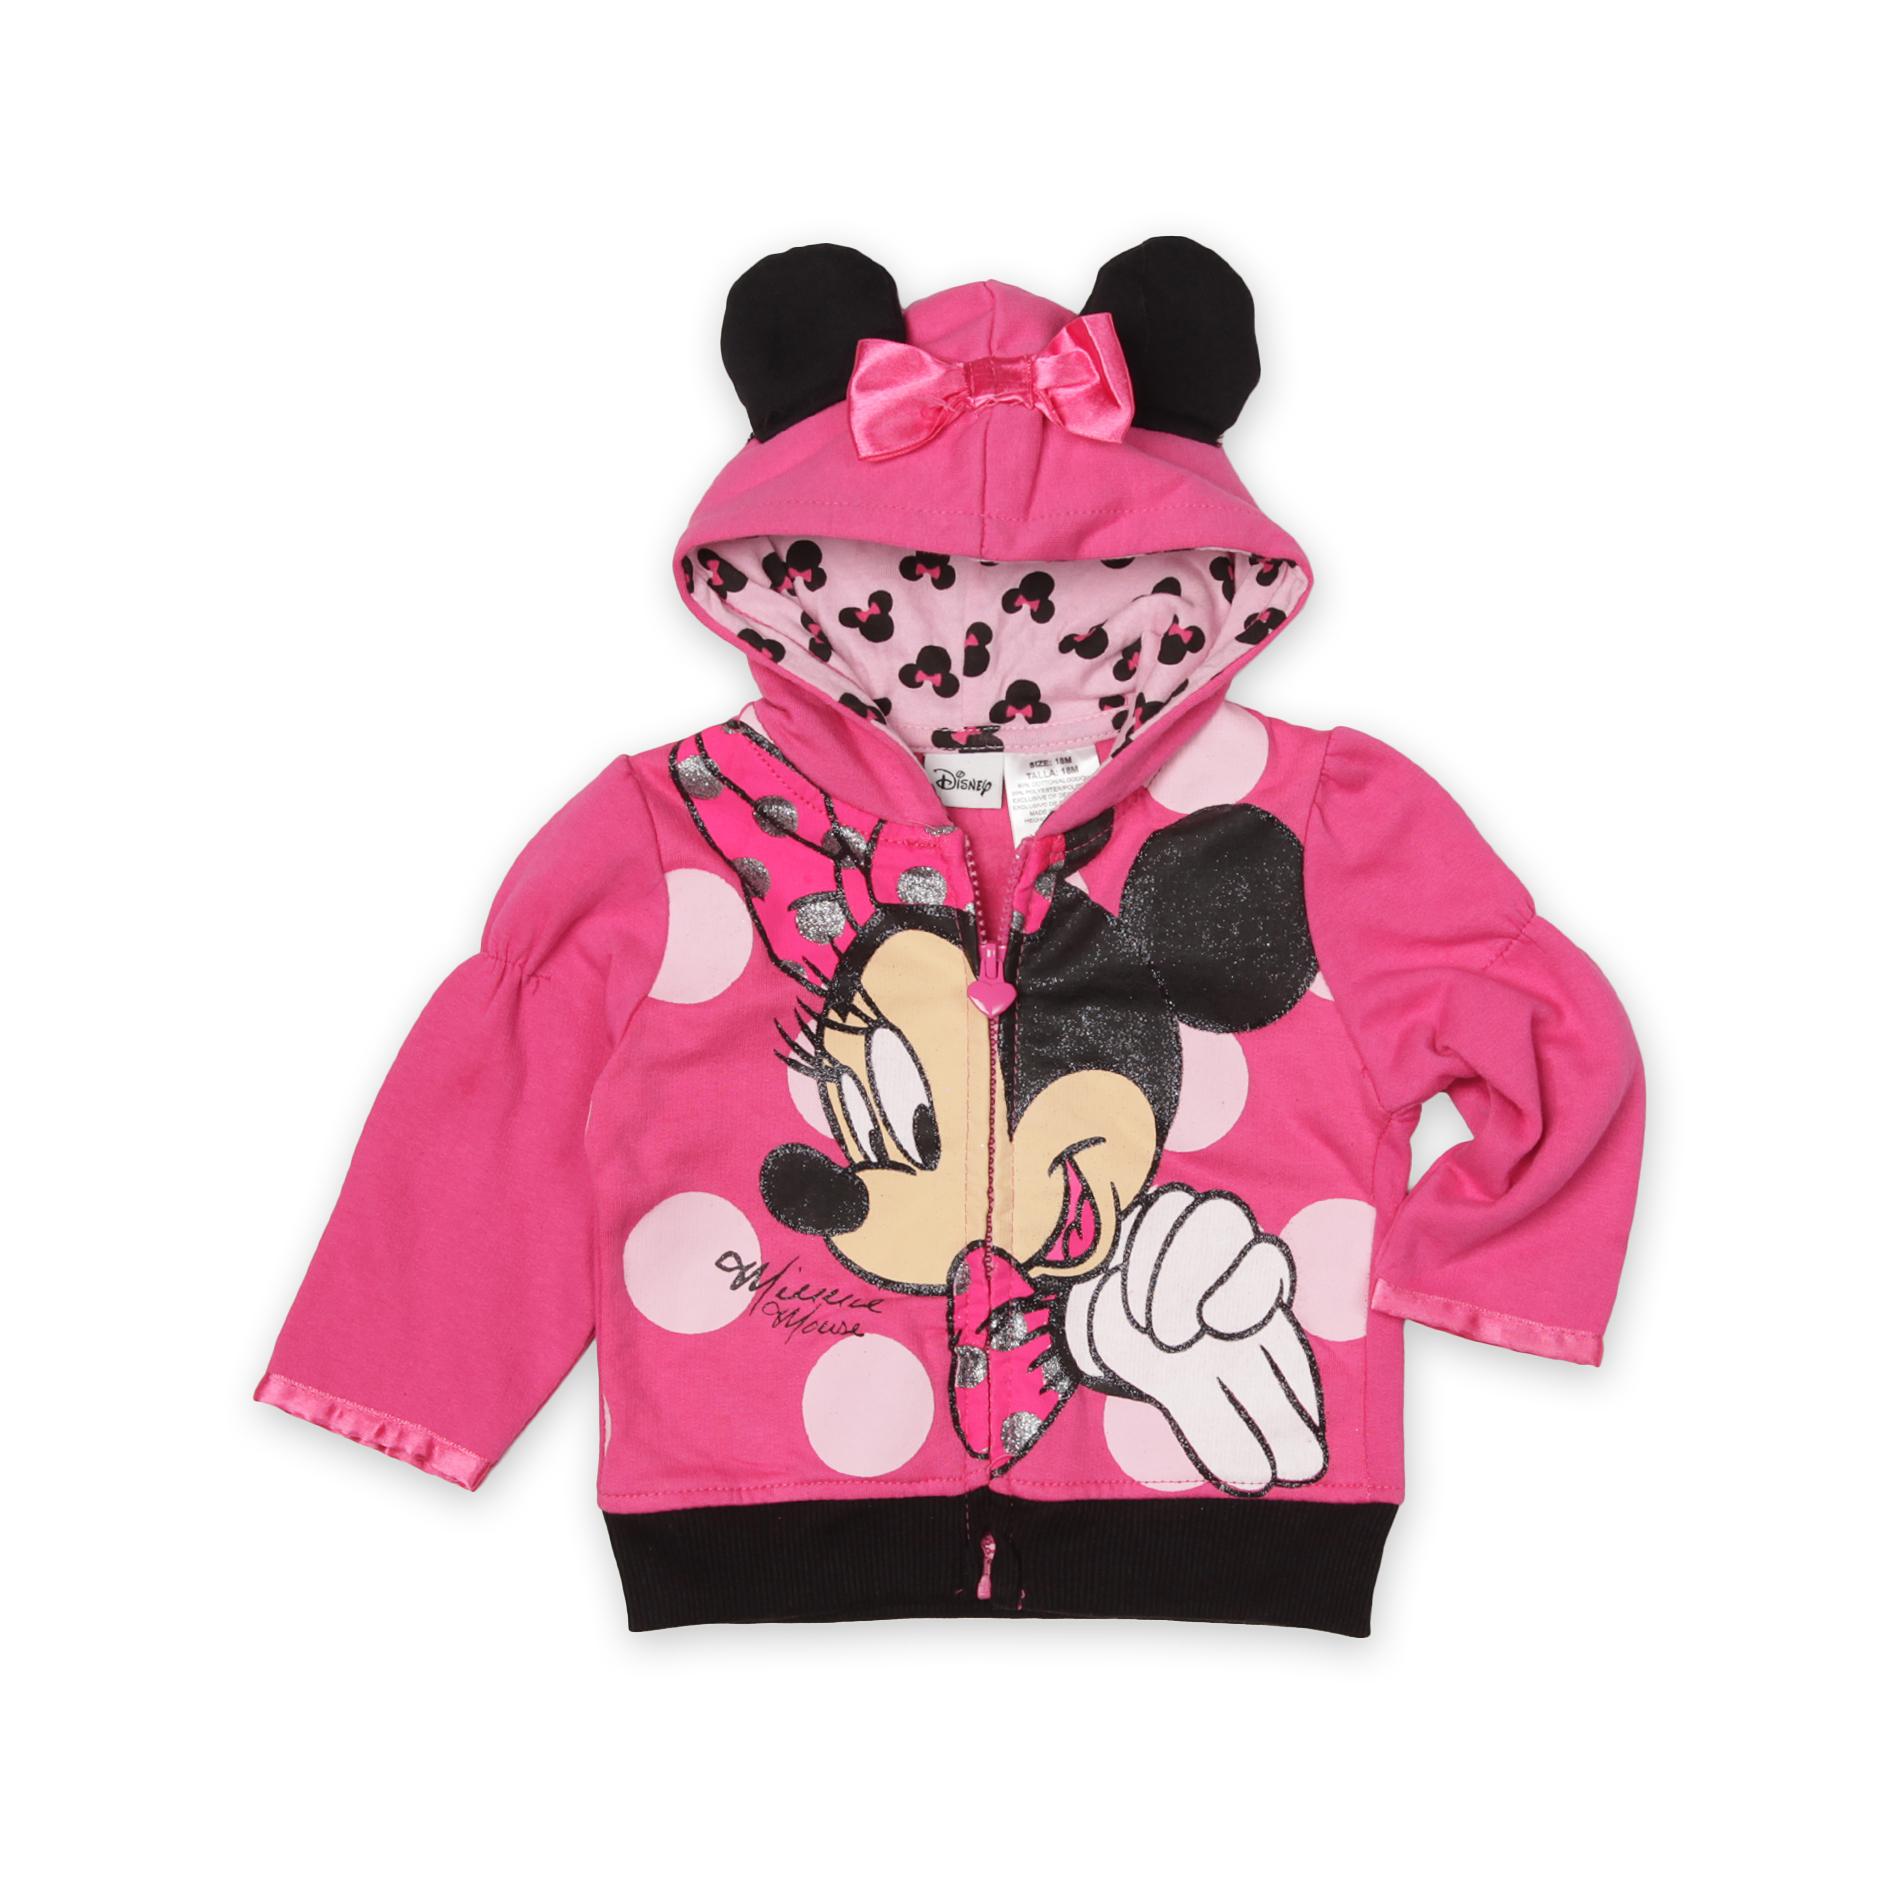 Disney Infant & Toddler Girl's Hoodie Jacket - Minnie Mouse